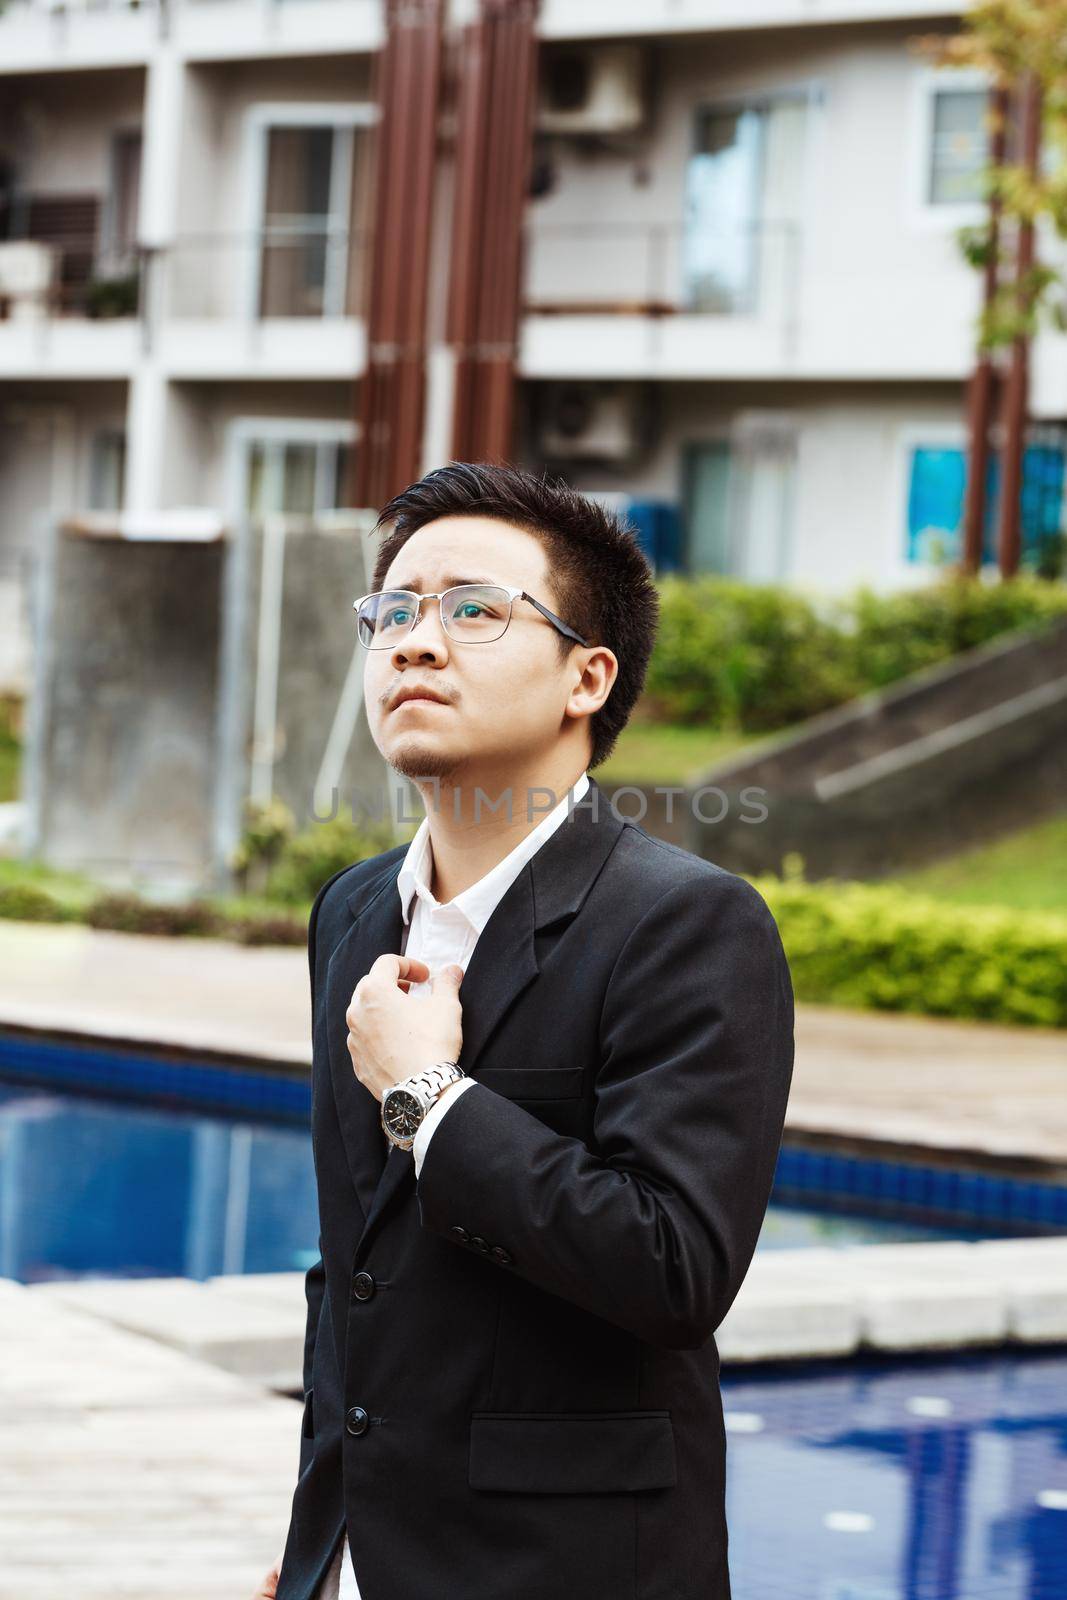 Concept Business - Handsome asian Business man ready to go for work